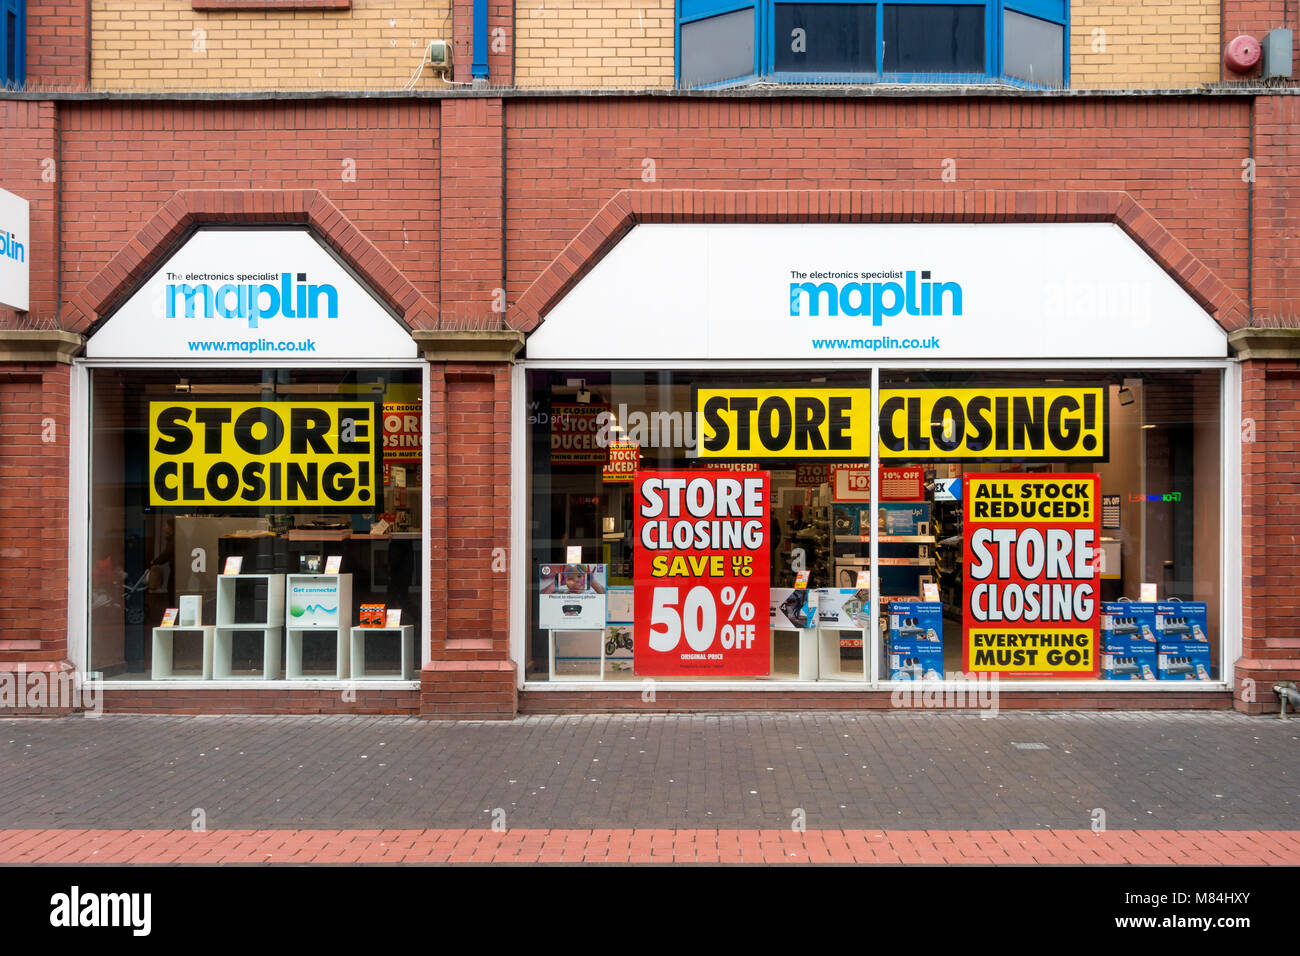 Maplin electronic equipment sale shop front with closure sale notices due to the company going into administration March 2018 Stock Photo